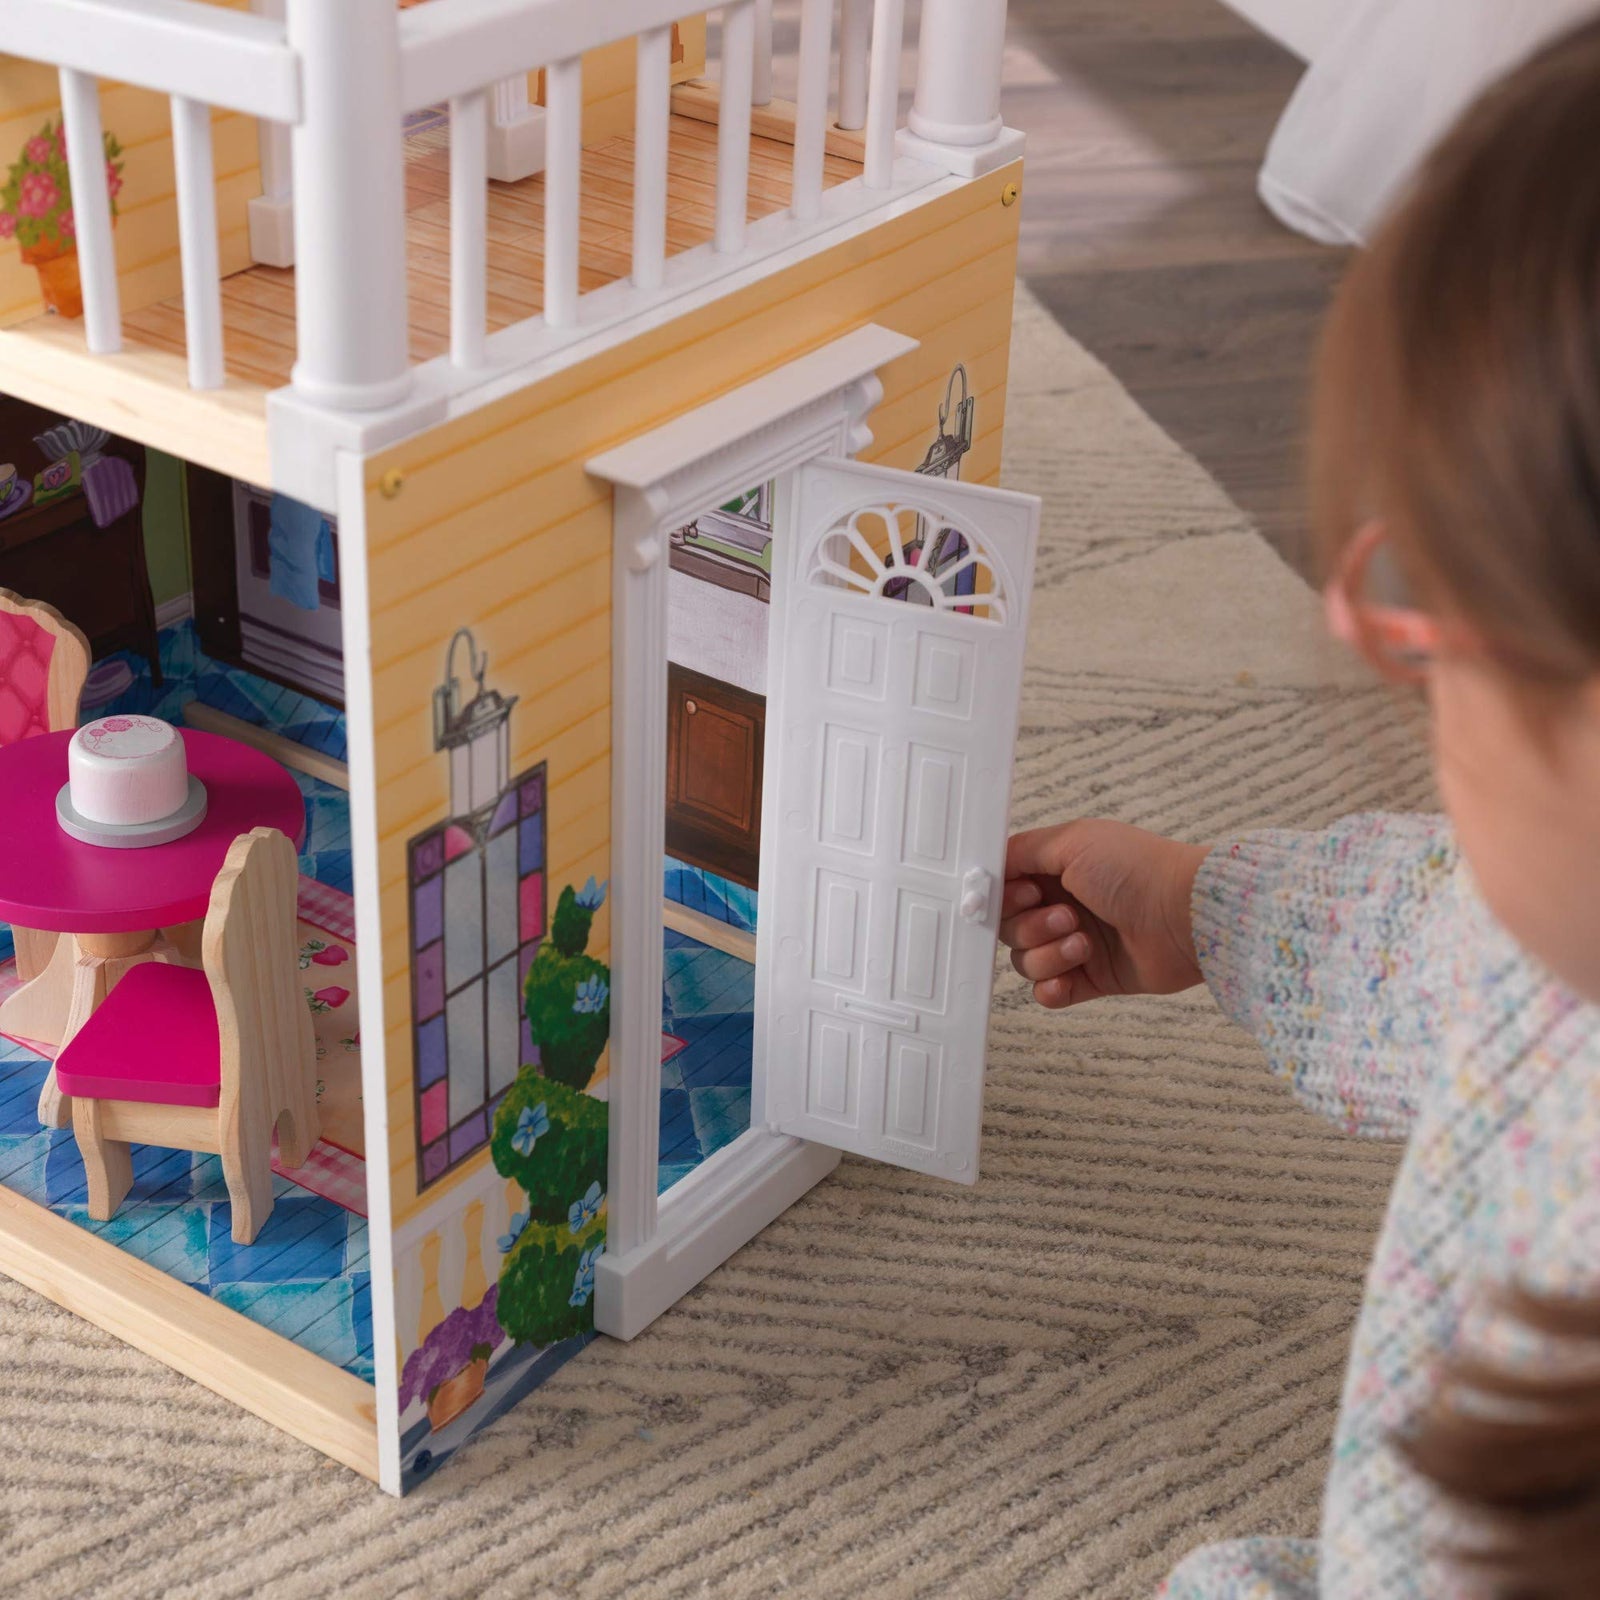 KidKraft My Dreamy Wooden Dollhouse with Lights and Sounds, Elevator and 14 Accessories, Gift for Ages 3+